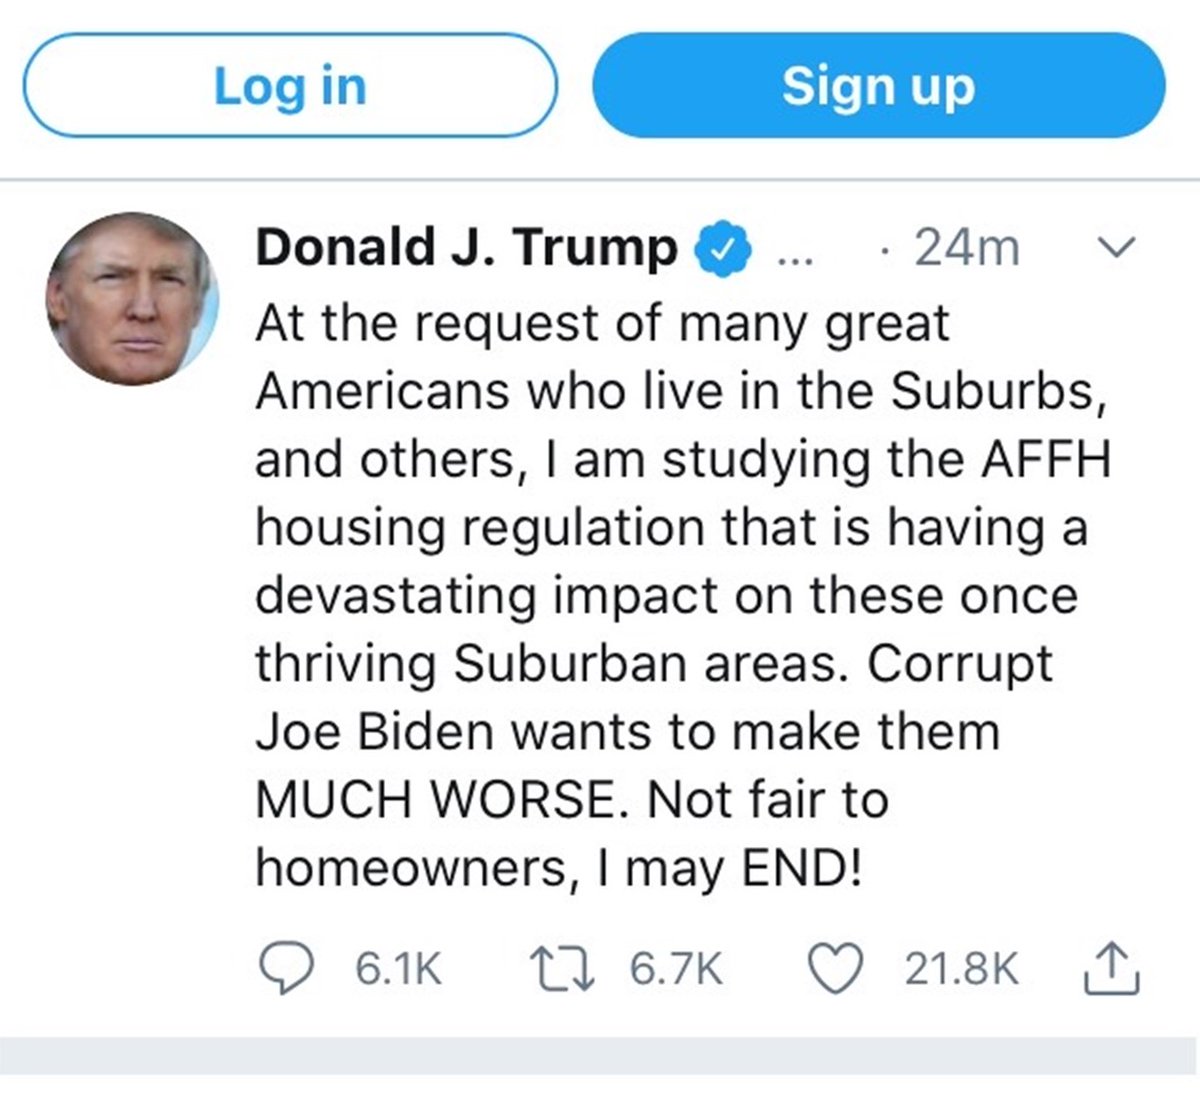 Pres Trump just tweeted that he may end key  #FairHousing provision because some suburban communities have requested he roll back the civil rights provision.  #AFFH is a major feature of the Fair Housing Act wh/ was passed as an honorarium to Dr. King 7 days after his death.